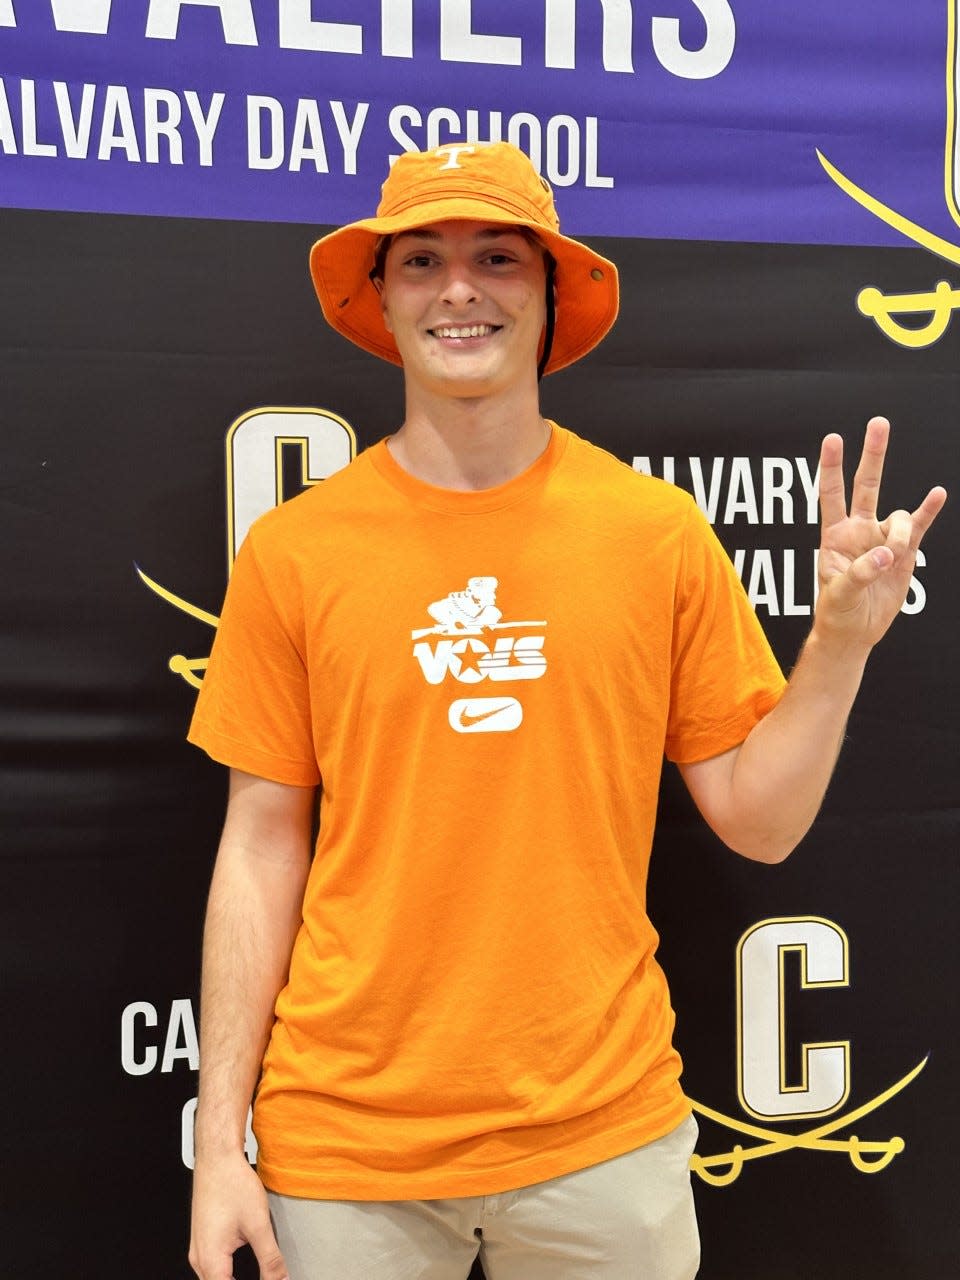 Jake Merklinger of Calvary Day announced his commitment to play football at Tennessee.